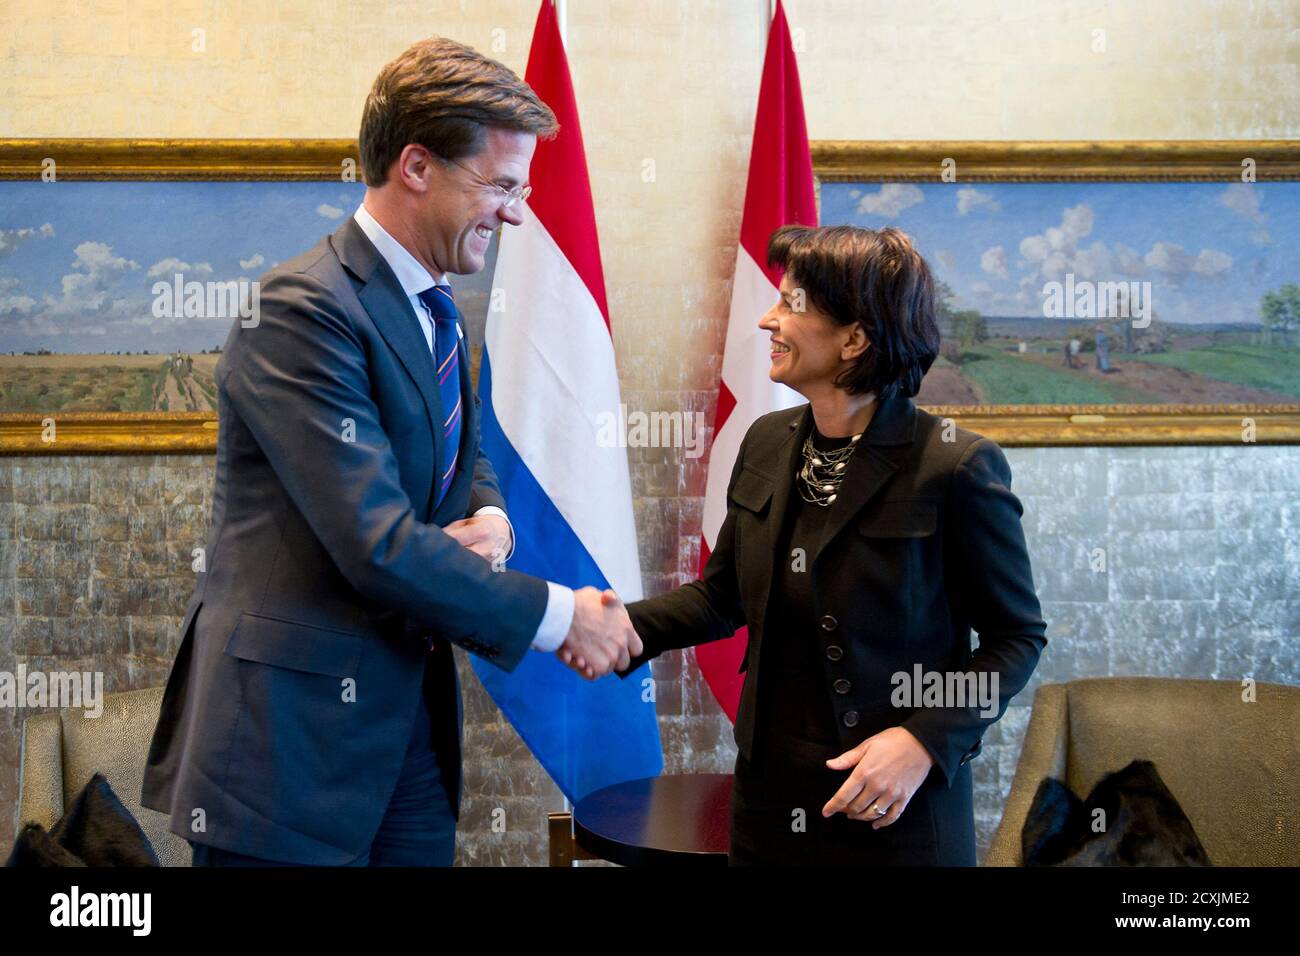 Swiss President Doris Leuthard (R) welcomes Netherland's Prime Minister  Mark Rutte for a meeting in the 'Private Dining Room' in a hotel in Zurich  December 2, 2010. REUTERS/Ennio Leanza/POOL (SWITZERLAND) 'THIS IMAGE